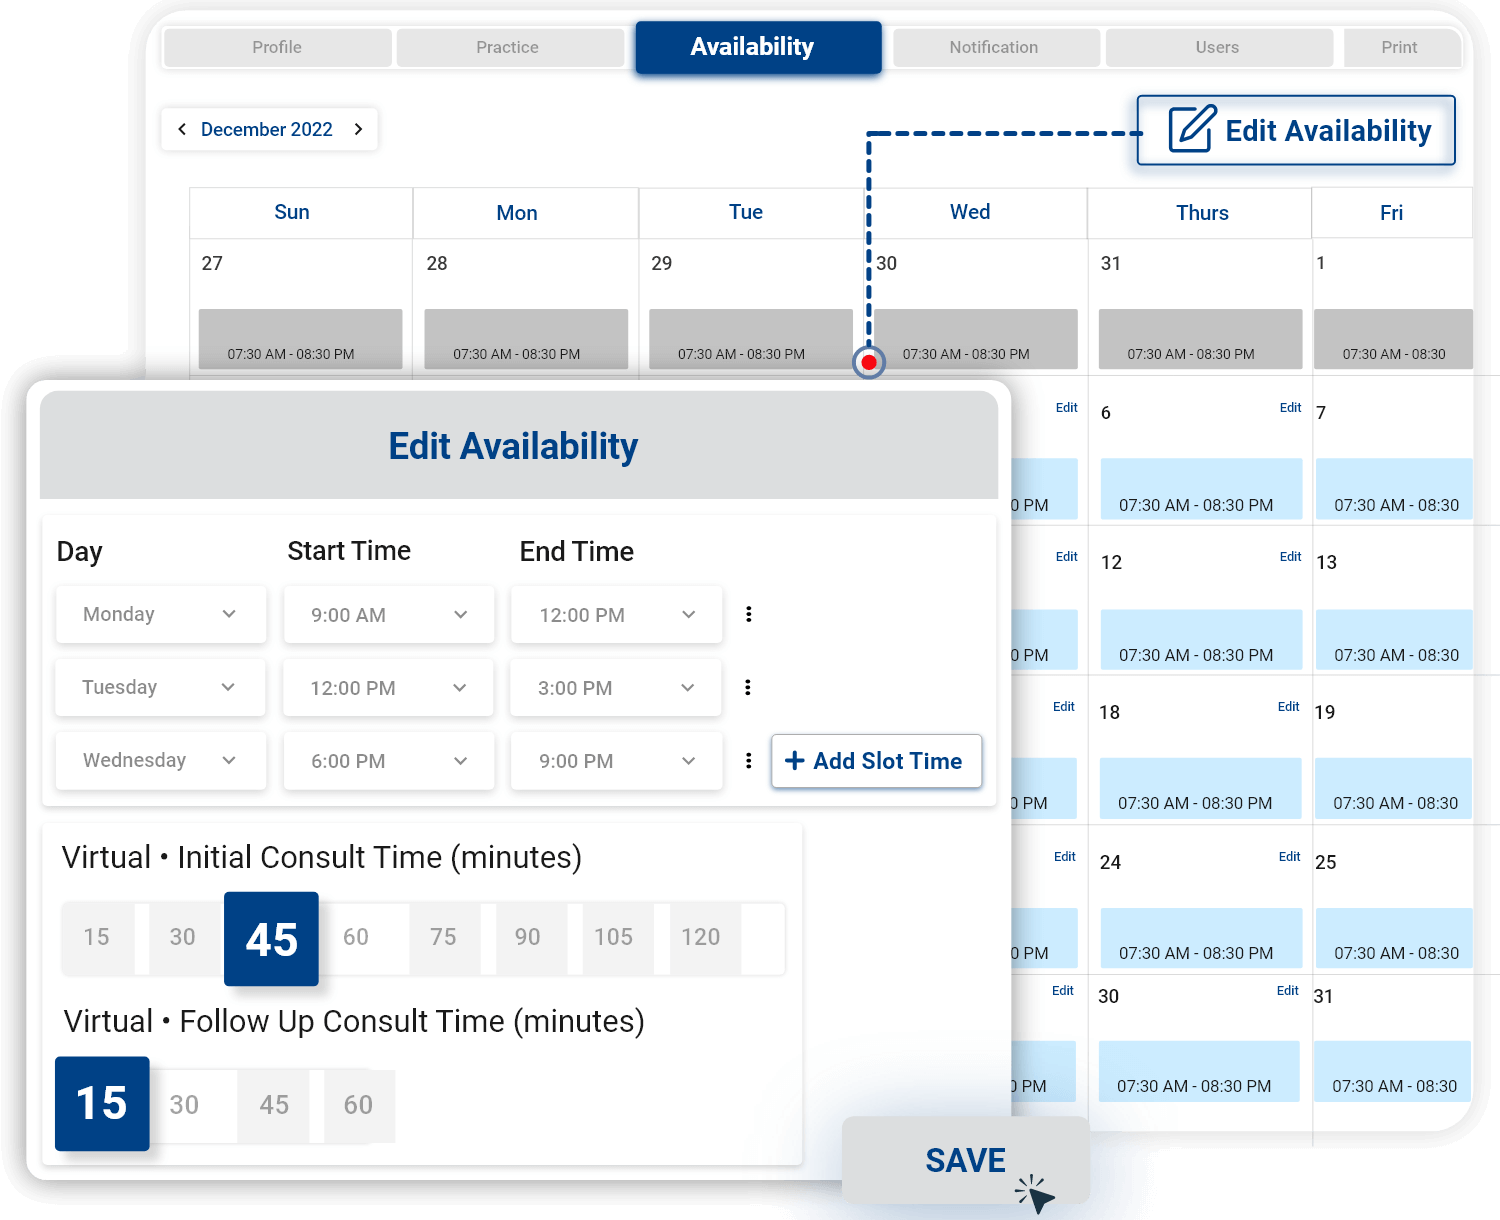 Calendar view for providers with editable availability options allowing them to add/remove appointment slots.